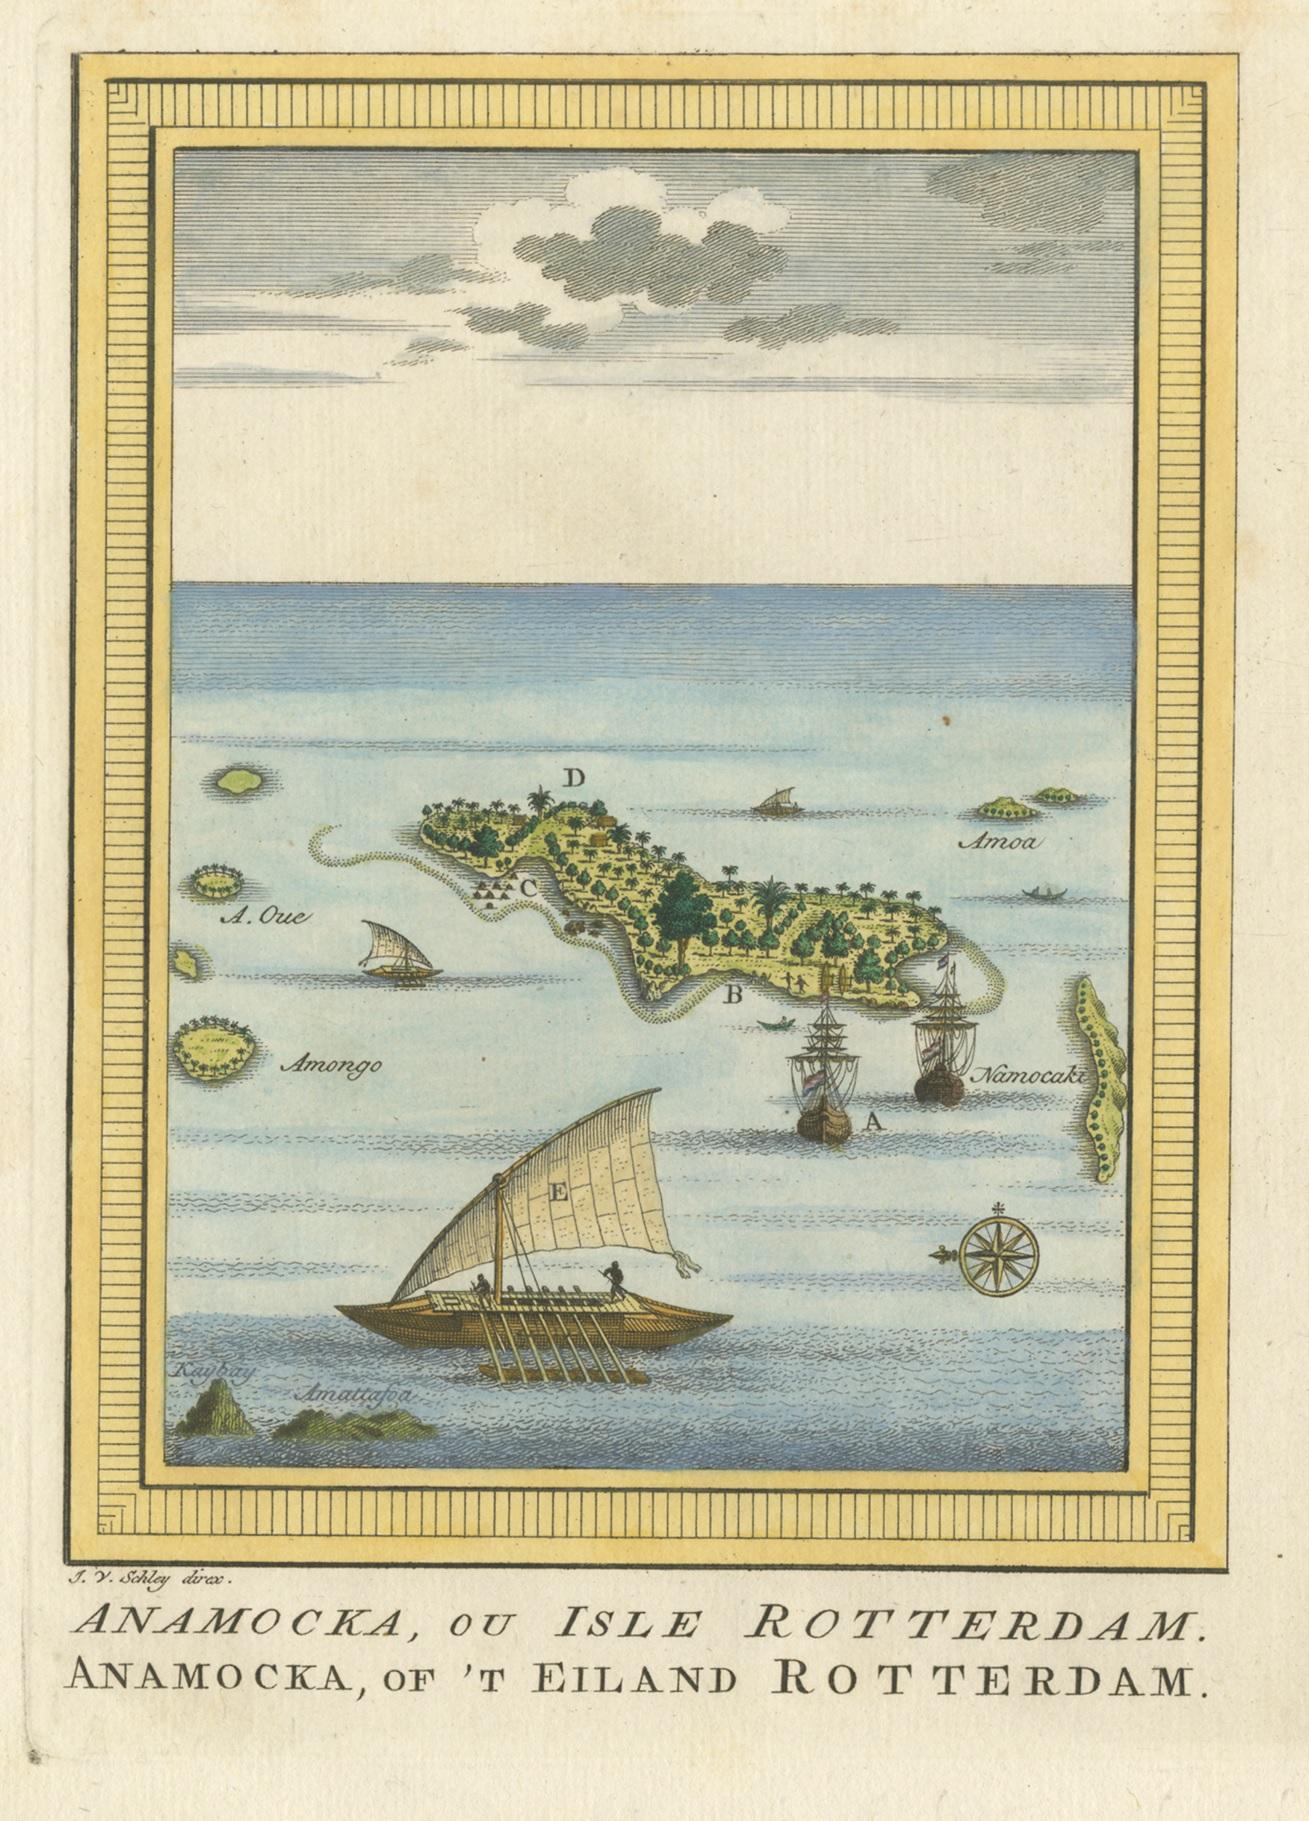 Antique print titled 'Anamocka, ou Isle Rotterdam, Anamocka, of 't Eiland Rotterdam'. View of Nomuka island, part of the Ha?apai group of islands in the Kingdom of Tonga. This print originates from volume 18 of 'Historische beschryving der reizen